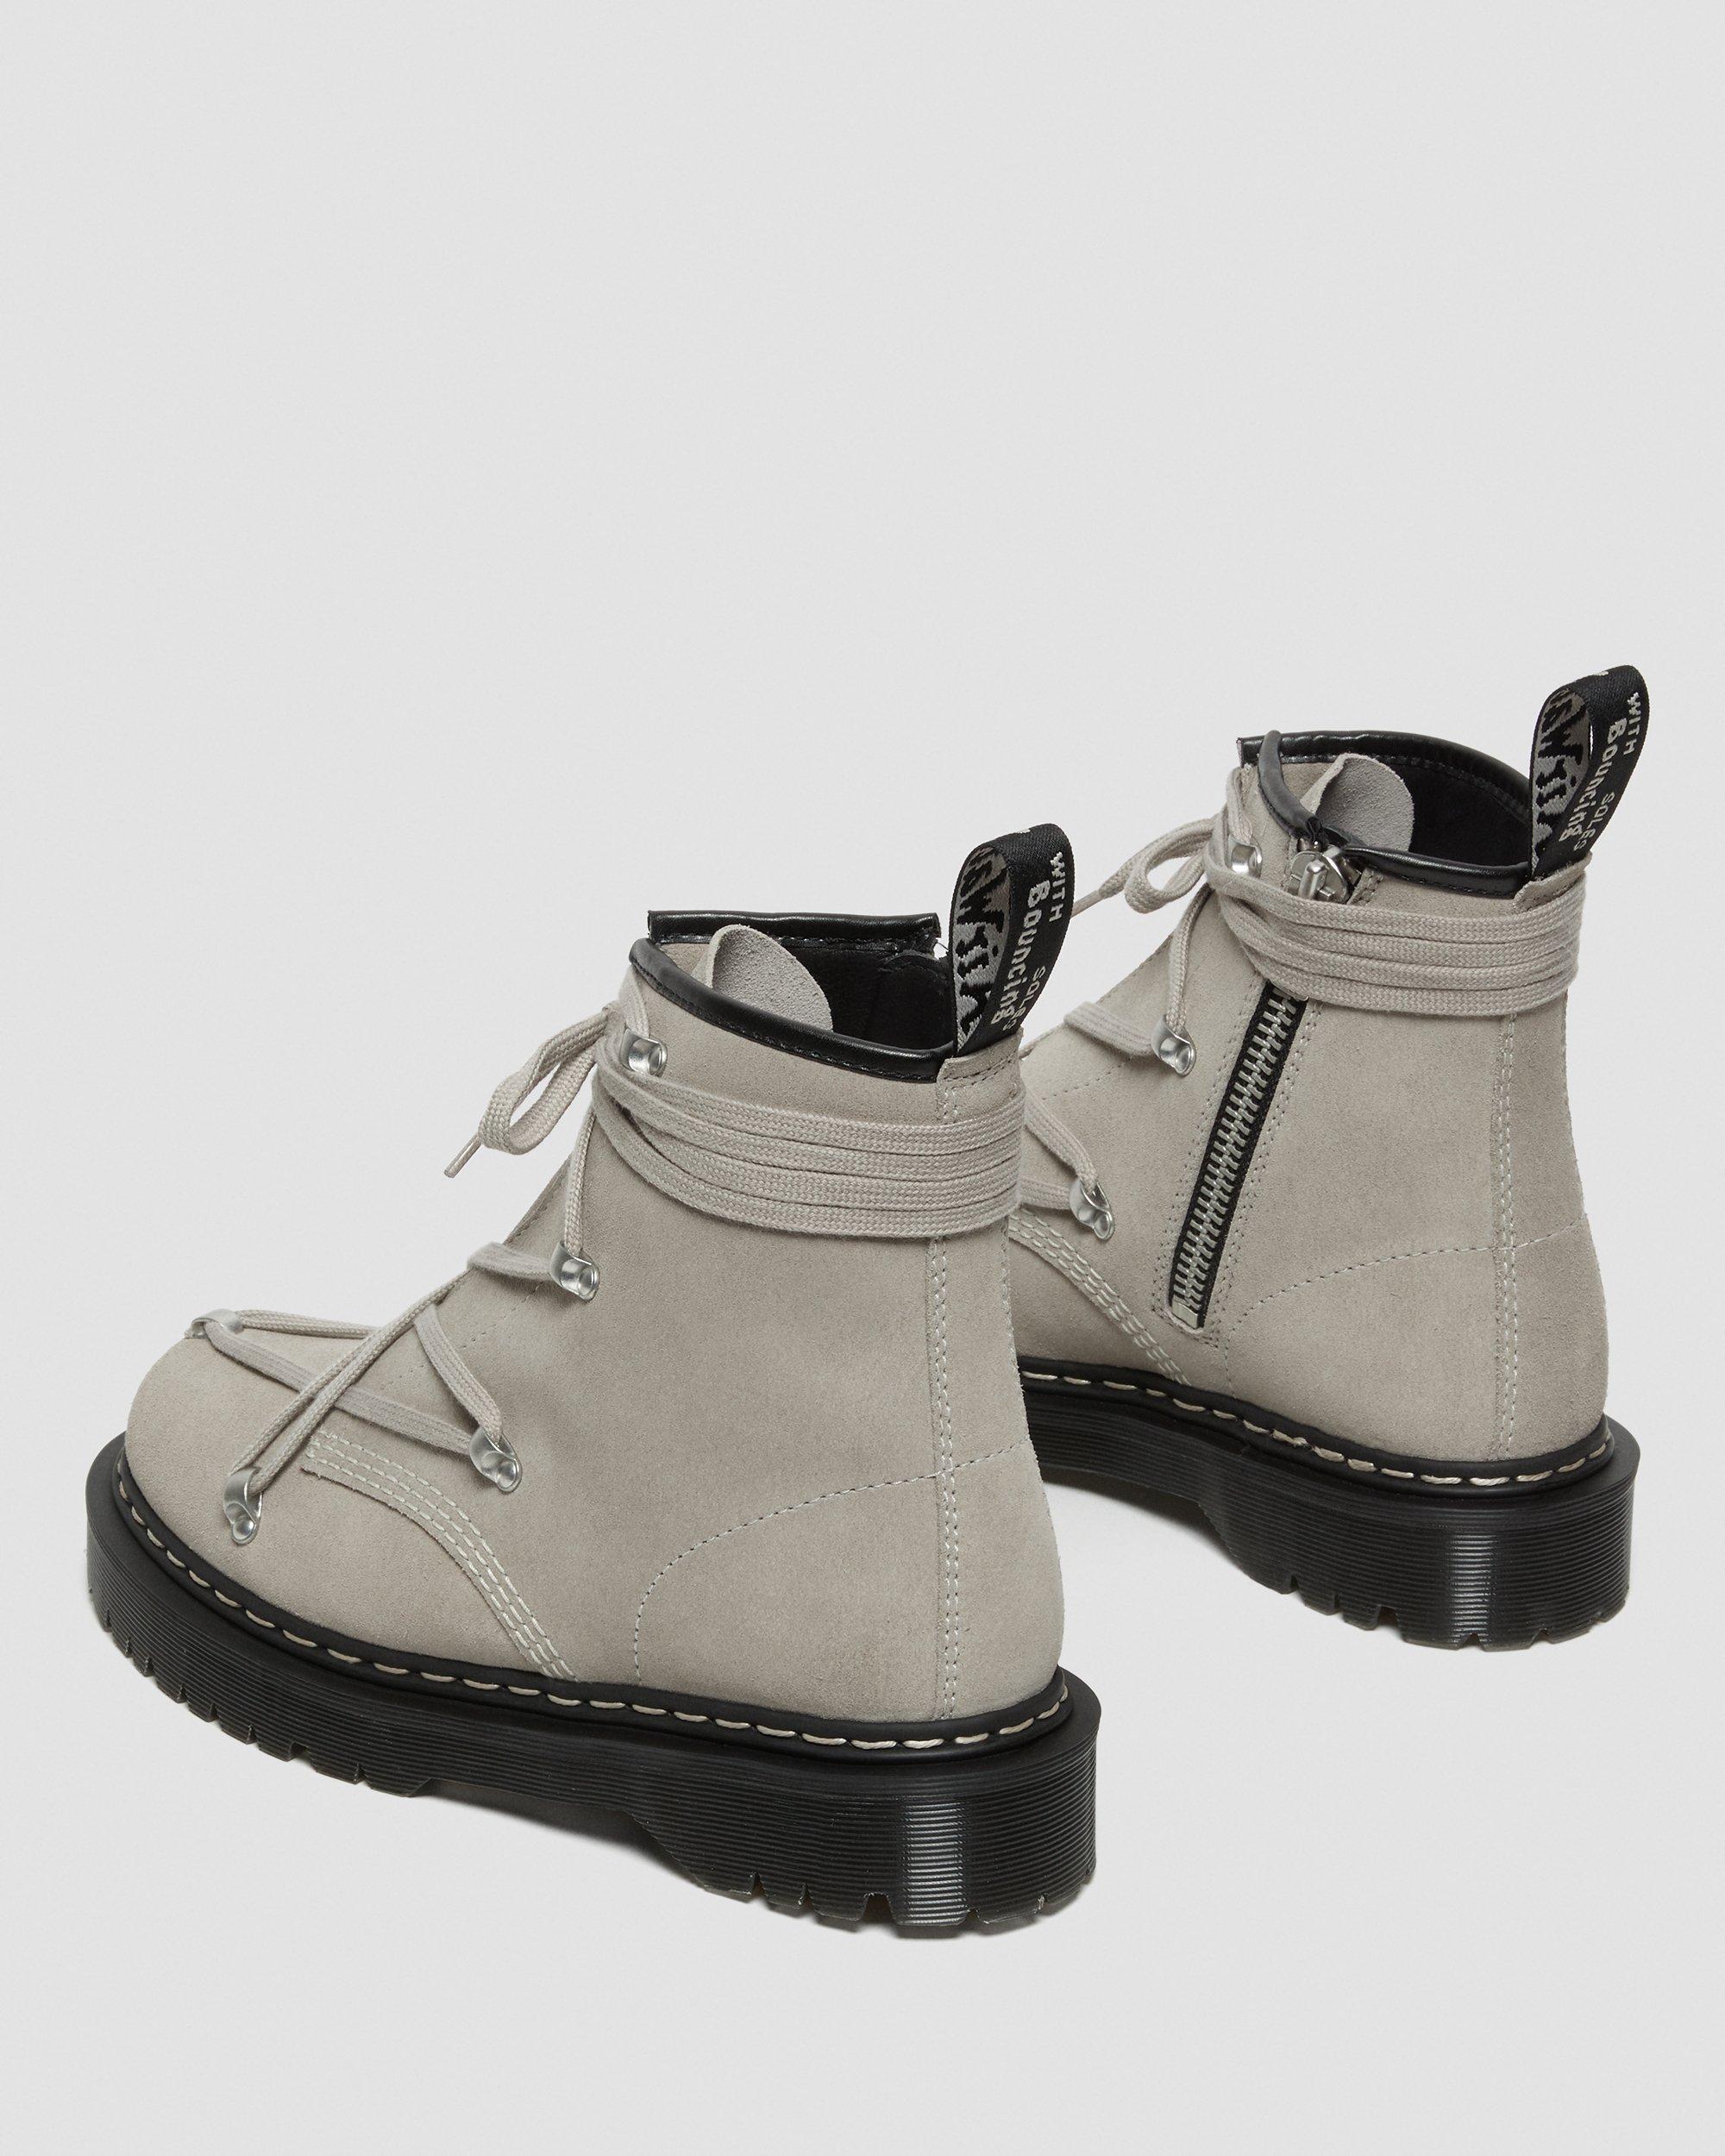 1460 Bex Rick Owens Boots in Light Taupe